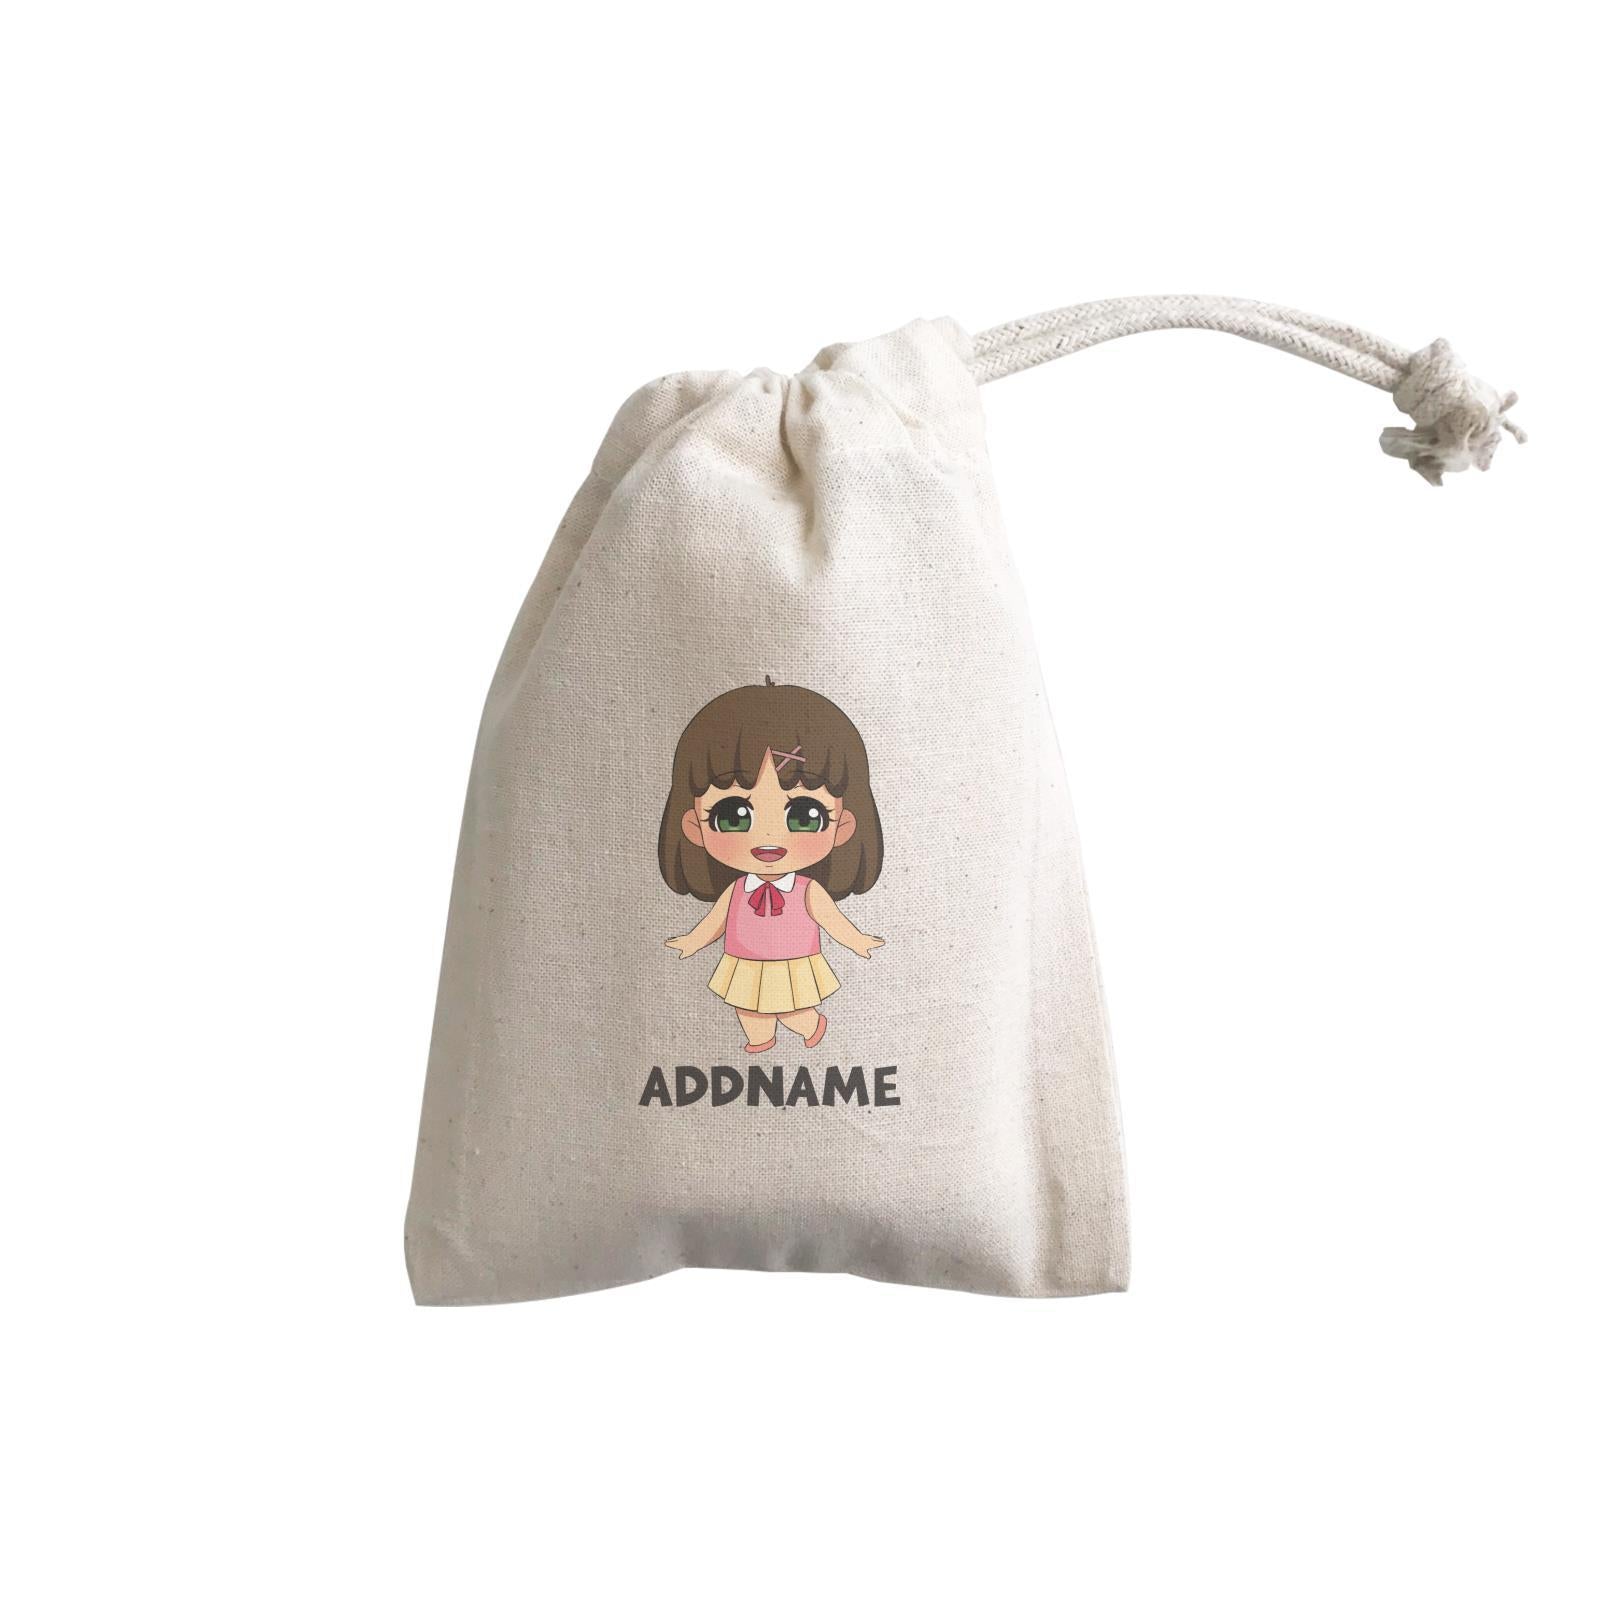 Children's Day Gift Series Little Chinese Girl Addname  Gift Pouch